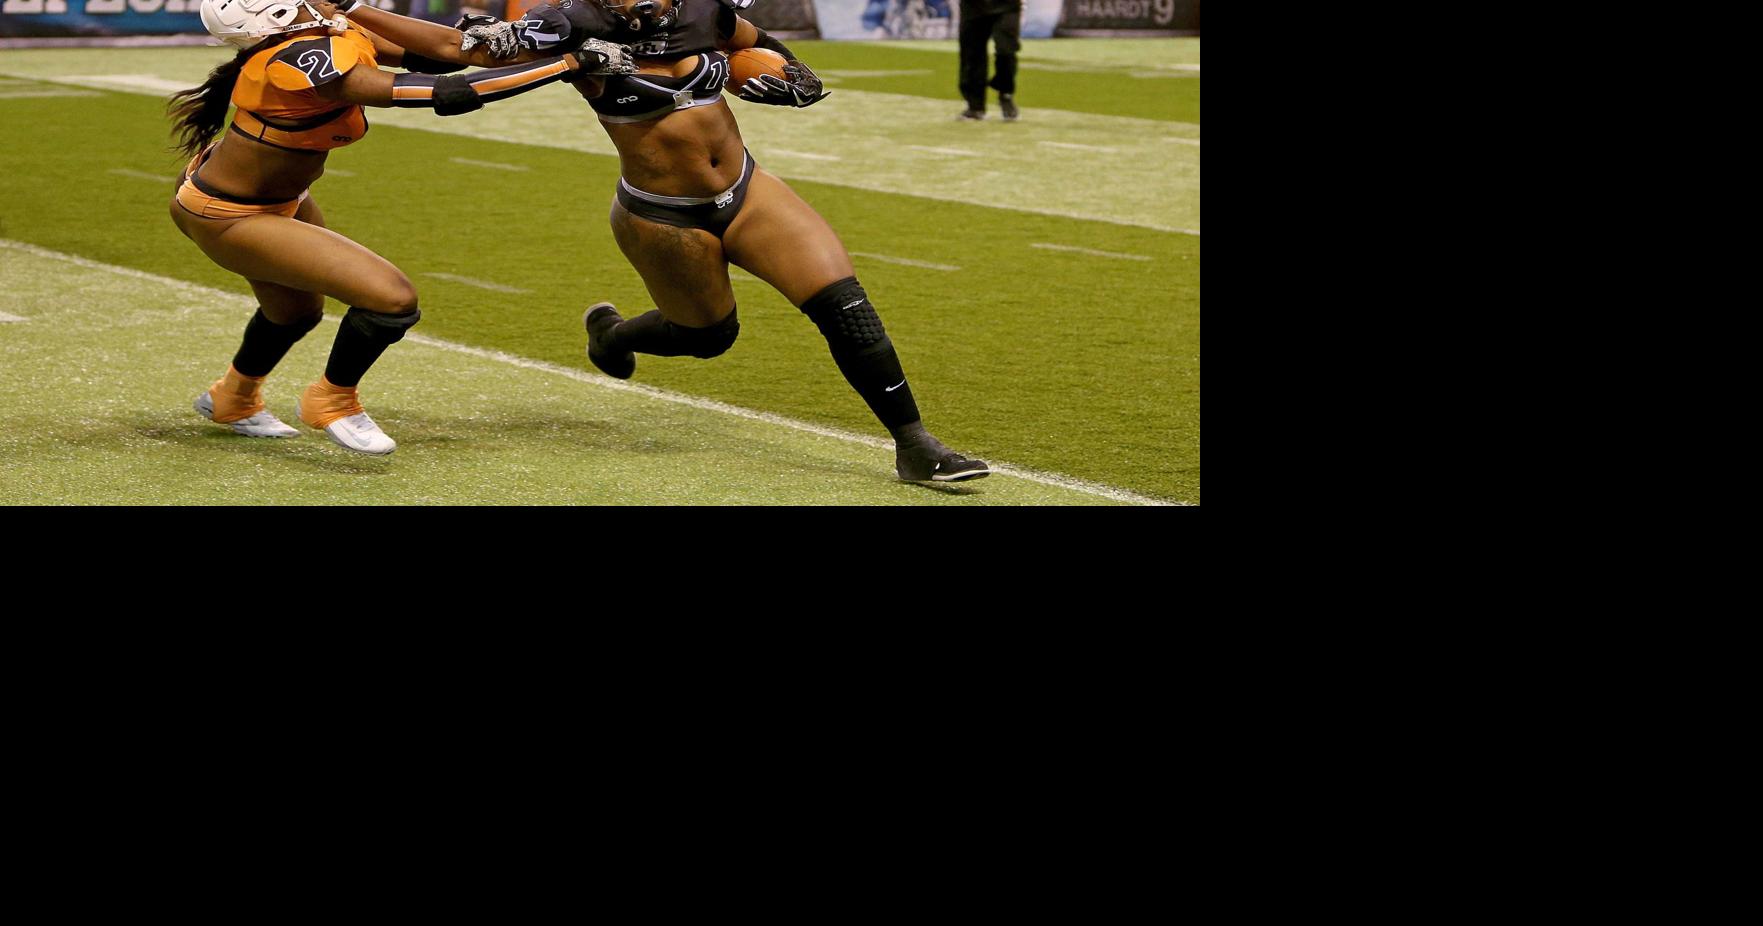 Legends Football League playoffs will be among the entertainment highlights  at Toyota Arena in Ontario, Sports